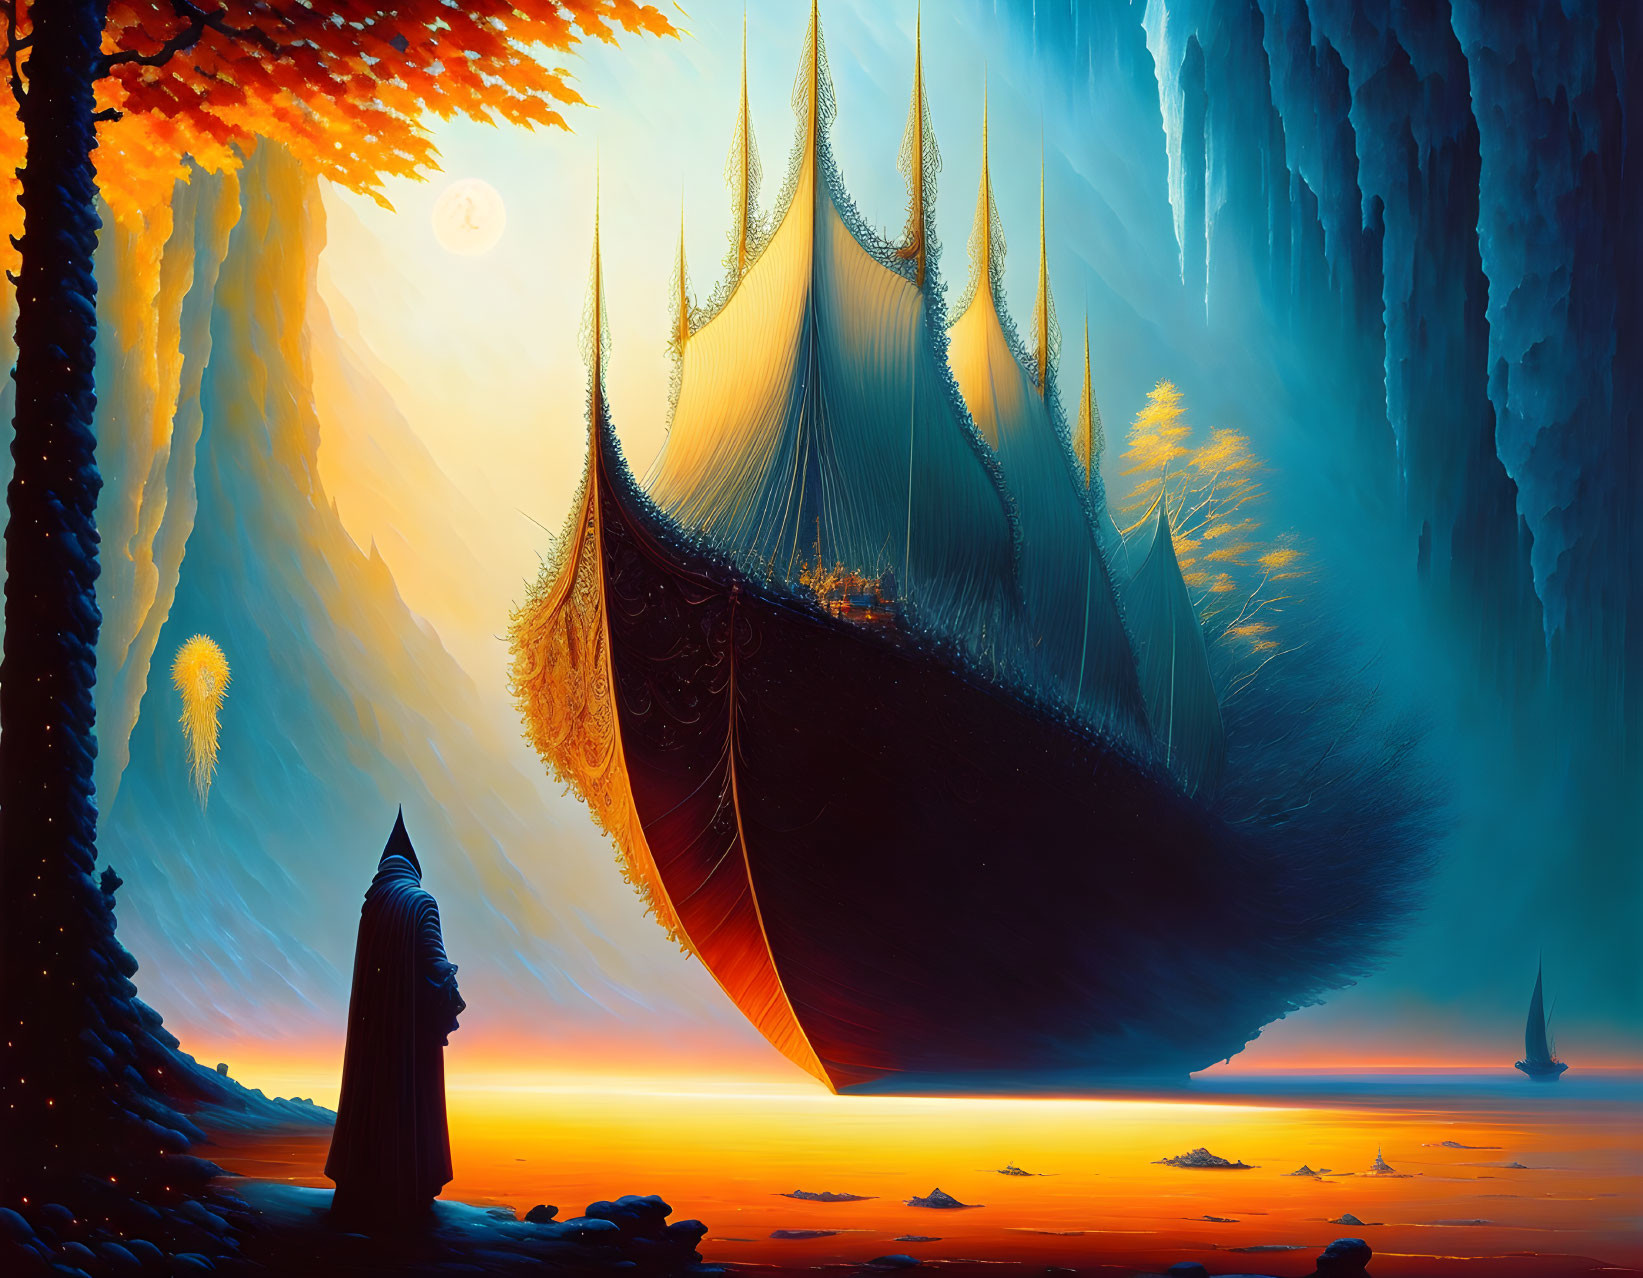 Fantastical landscape with cloaked figure and floating ship in vibrant skies